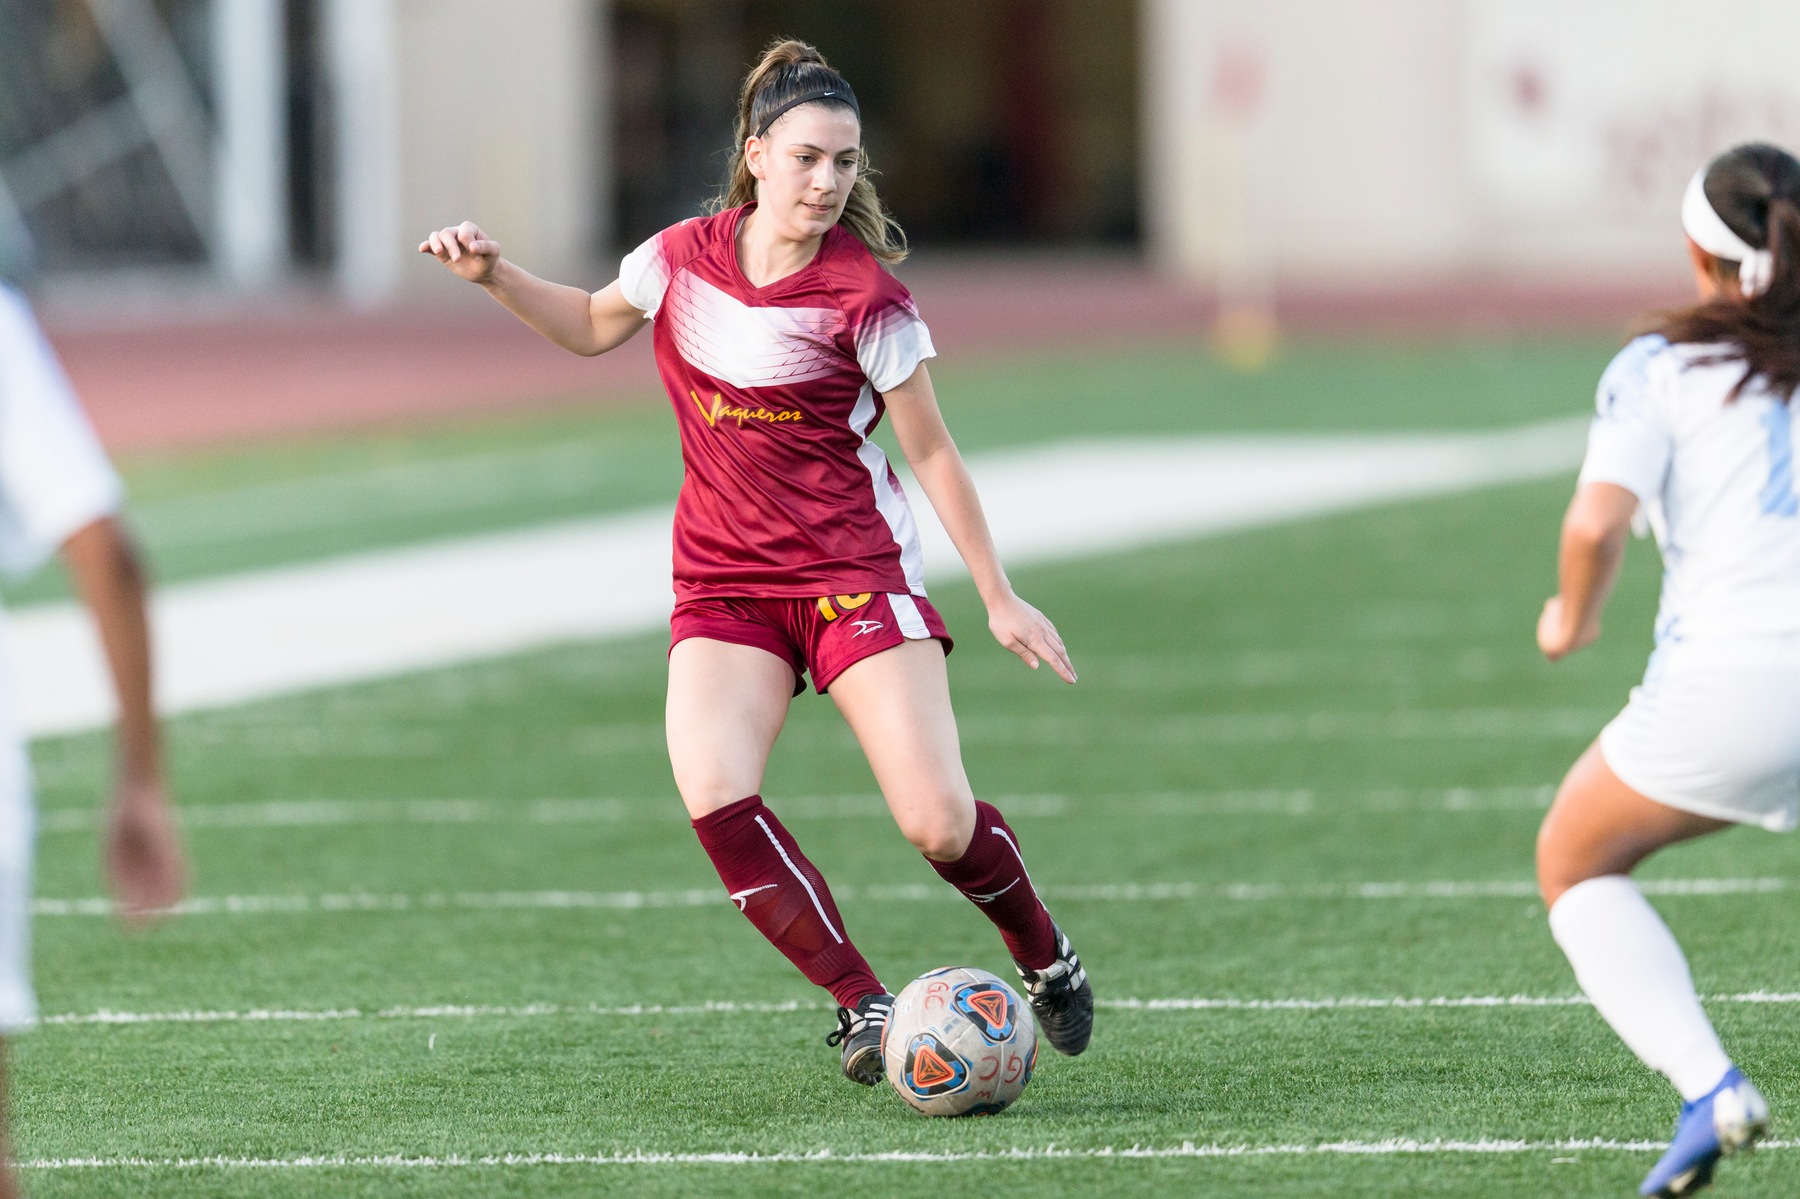 Women's soccer team wins final home game of the season 2-1 over West L.A.